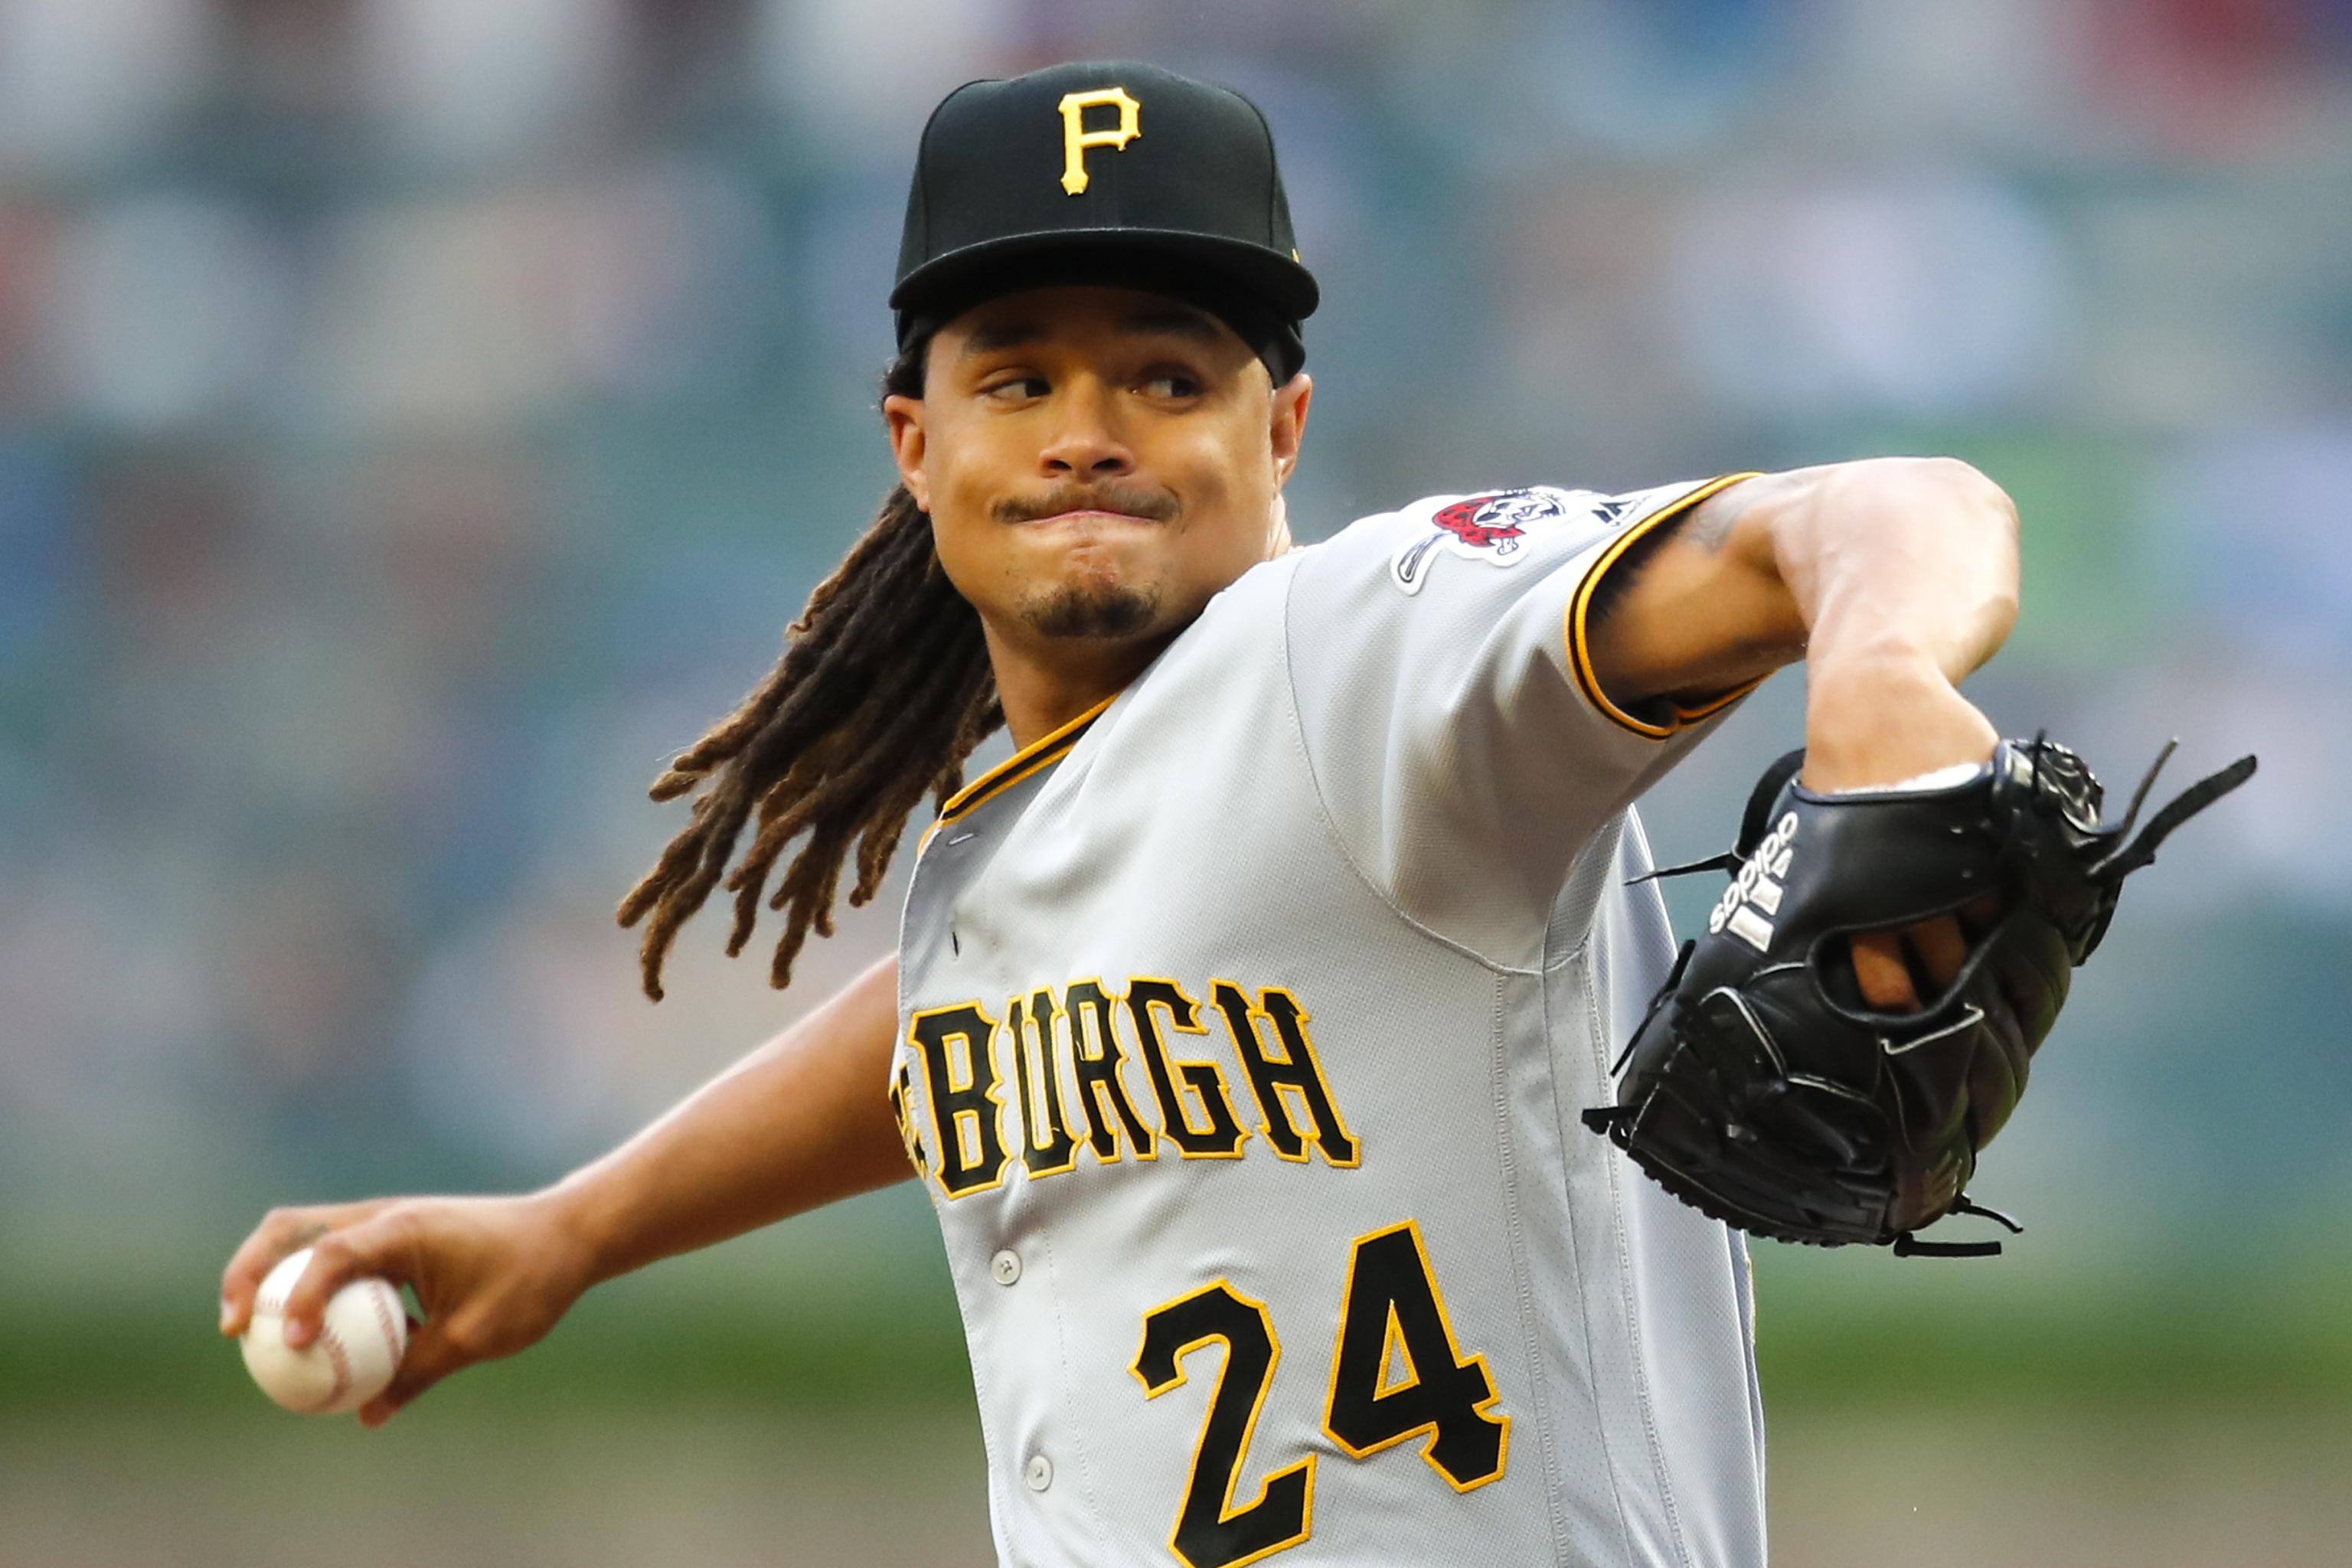 How a Chris Archer pitch ignited a benches-clearing brawl between Reds and  Pirates